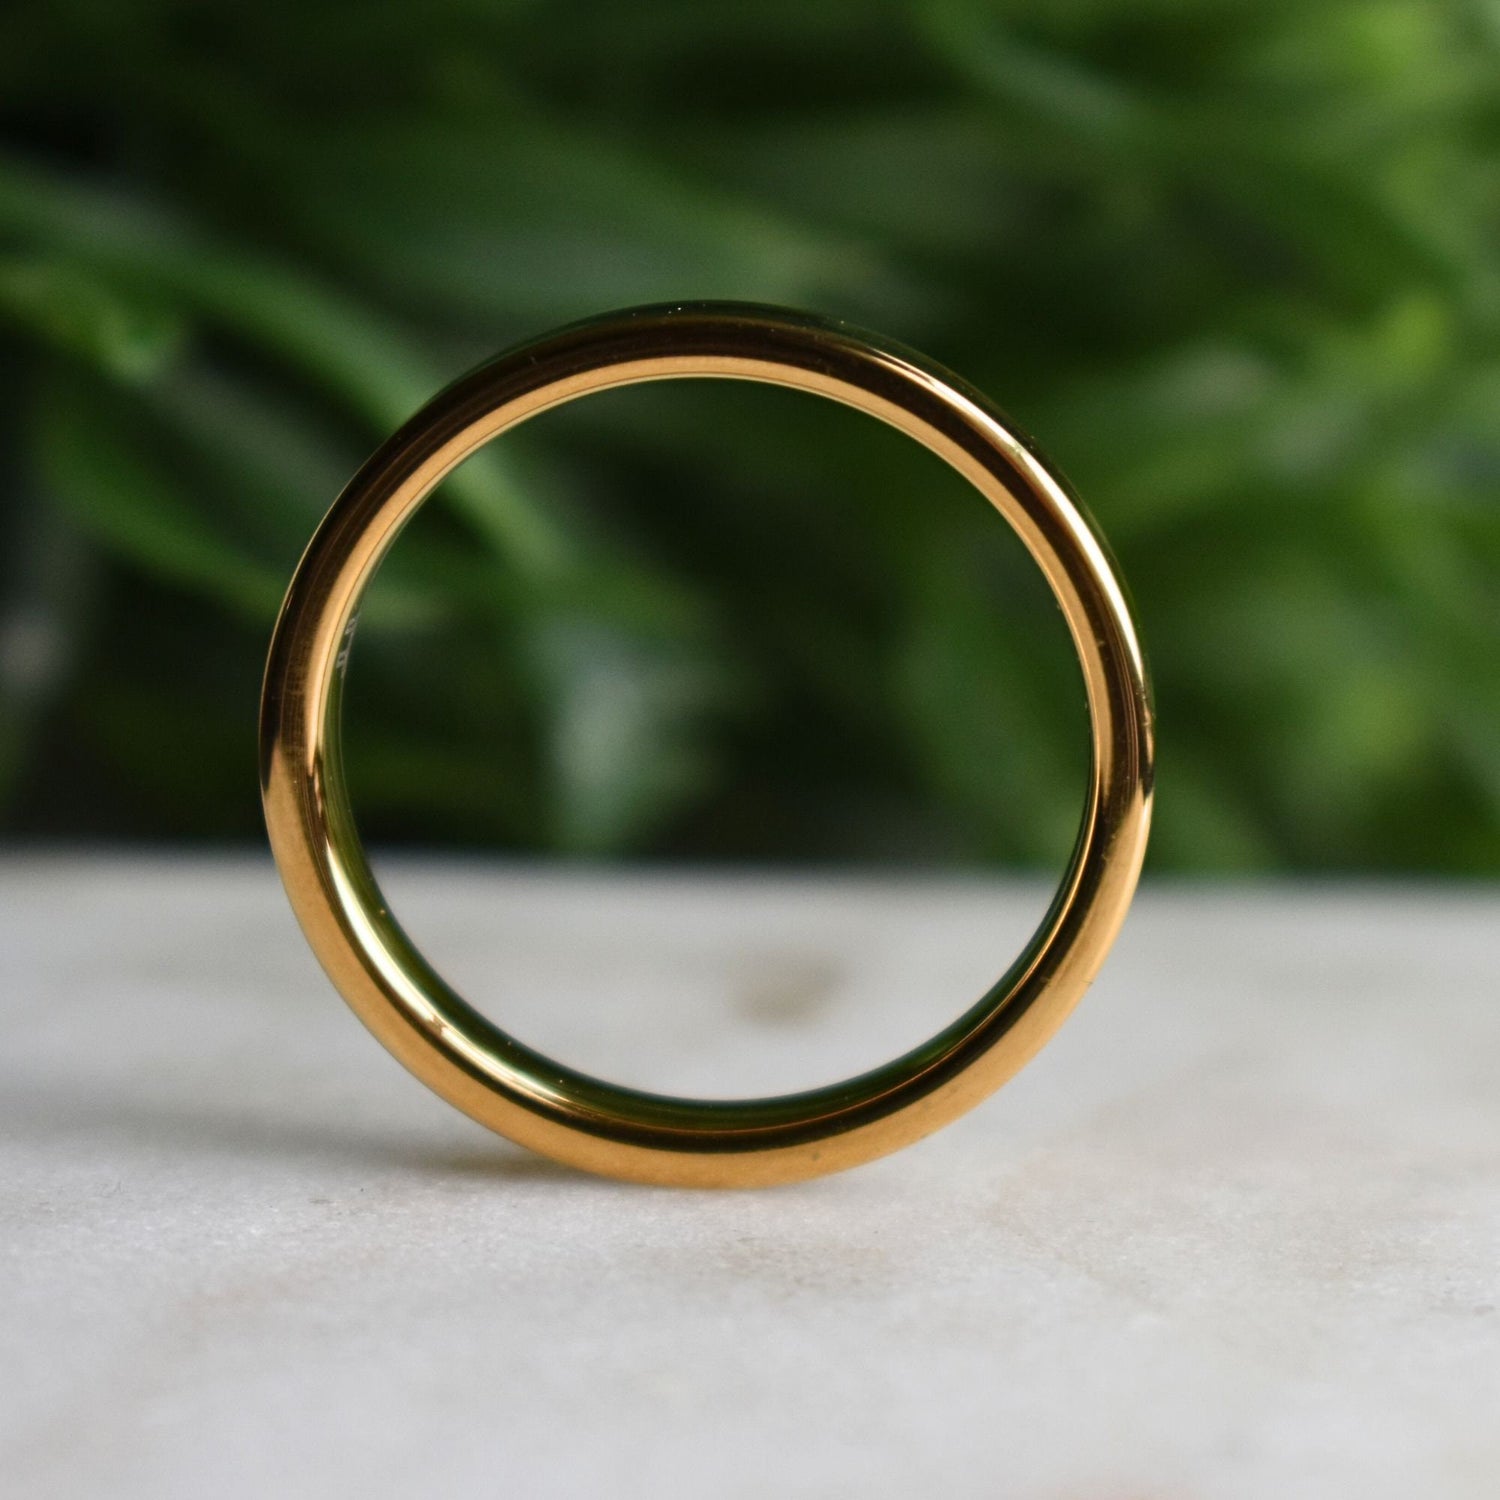 Gold Rings for Women | Gold rings jewelry, Mens gold jewelry, Women rings